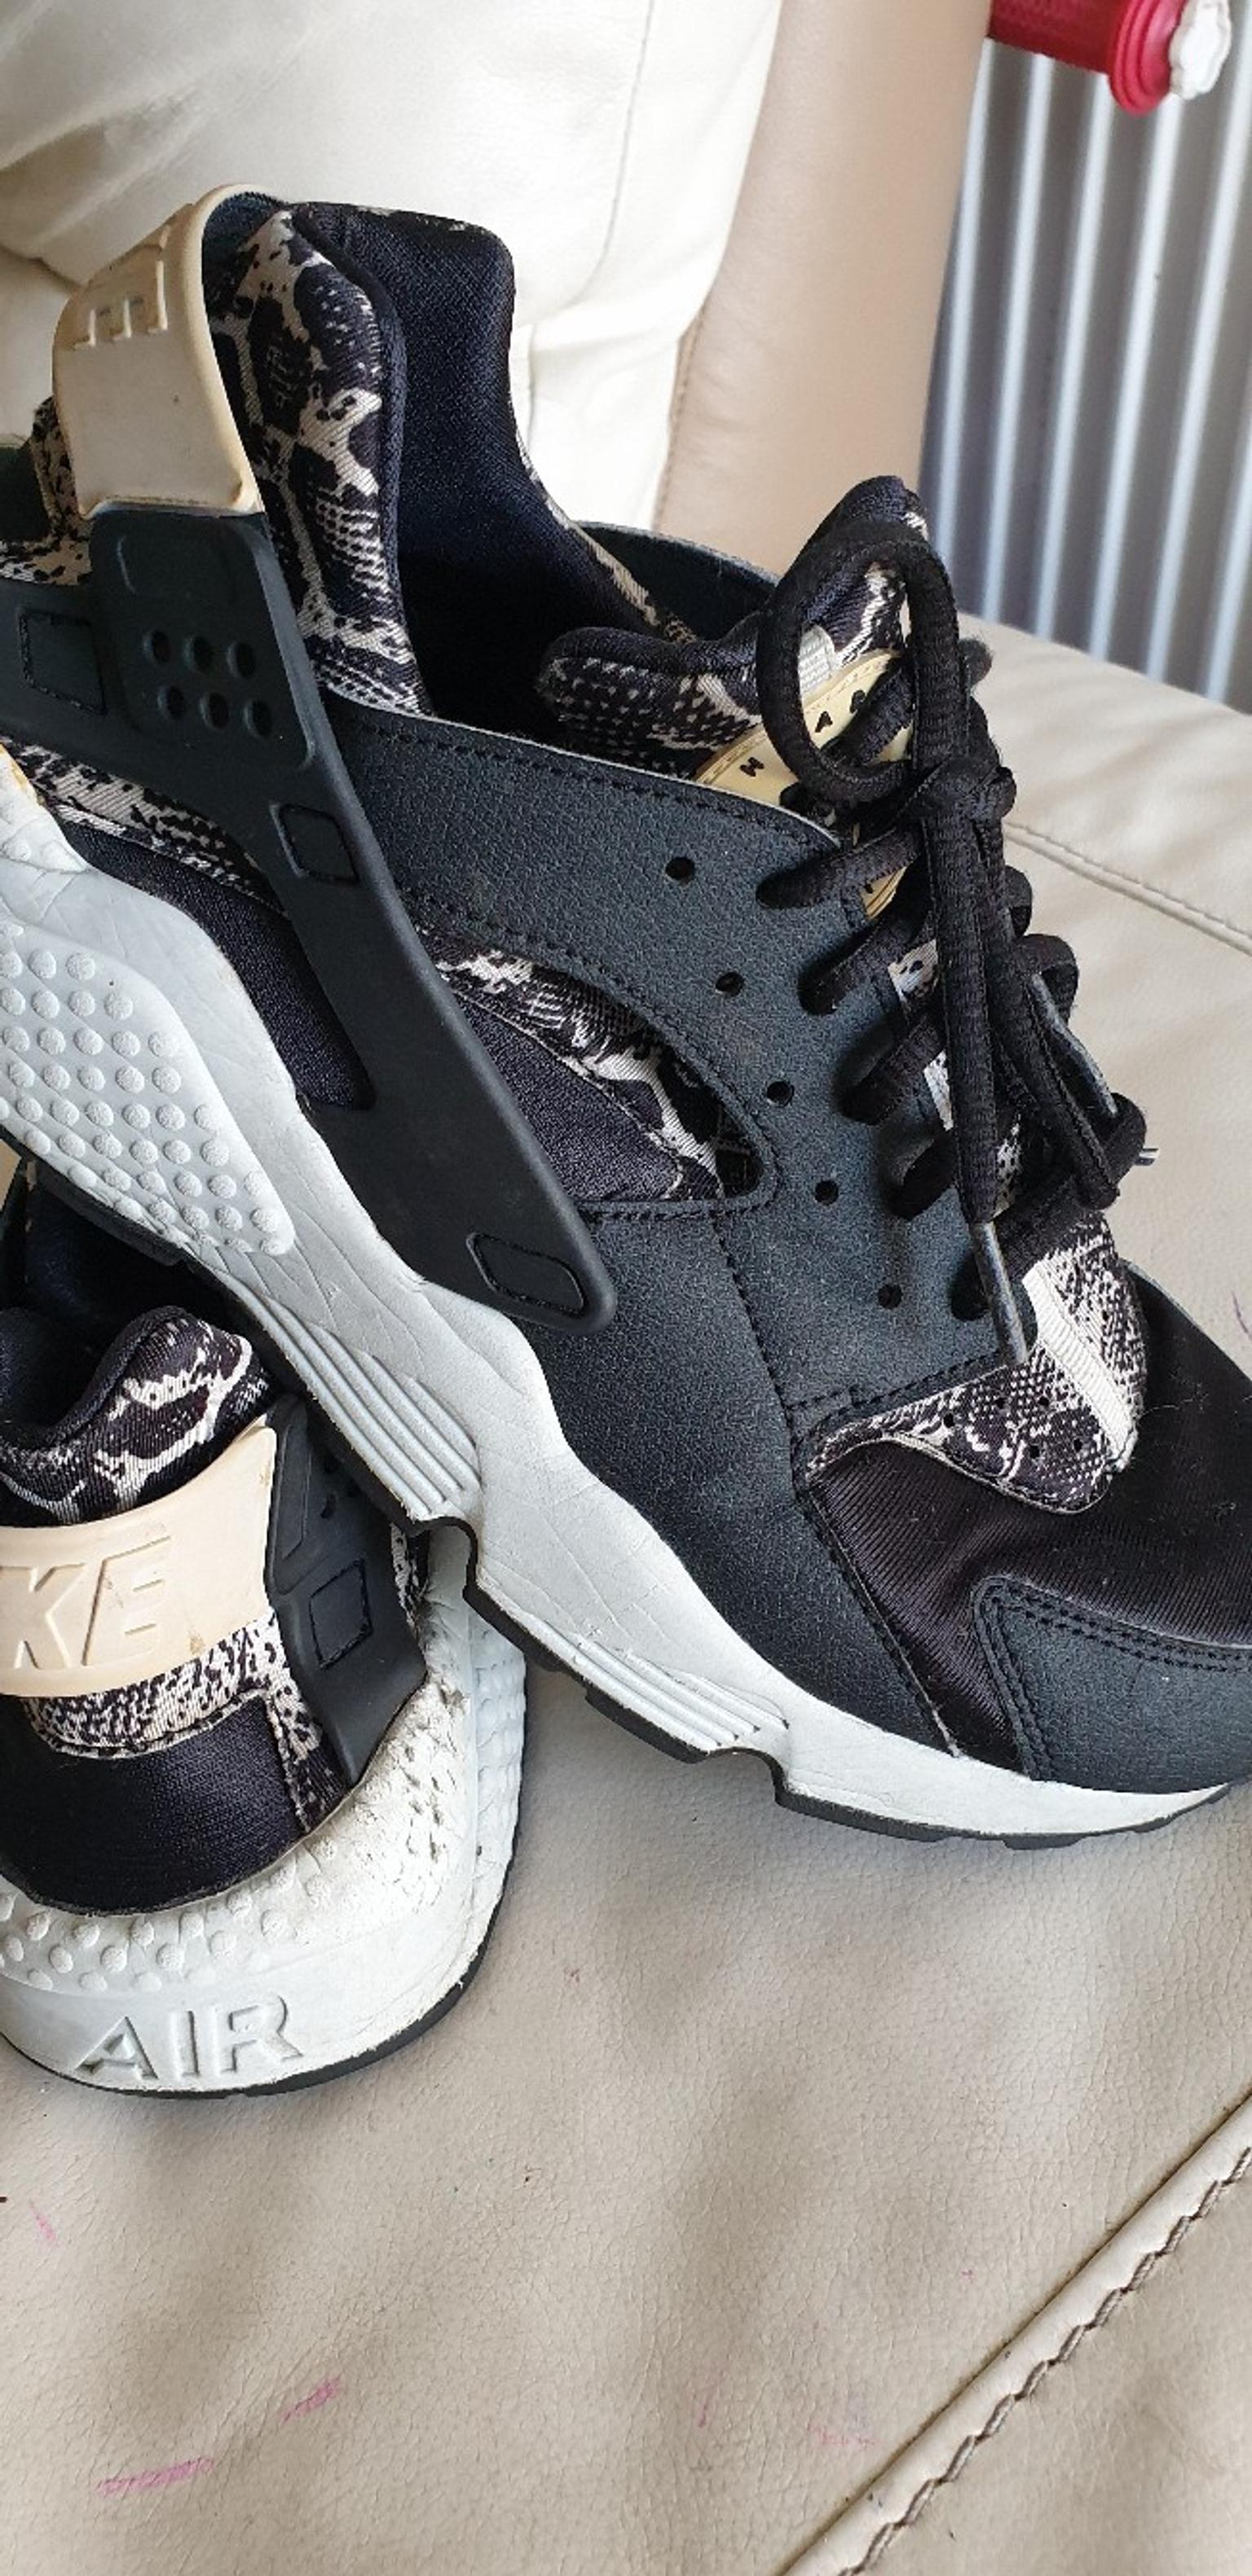 MENS NIKE AIR HUARACHE TRAINERS BLACK UK 9 in SW4 London for £12.00 for sale - Shpock